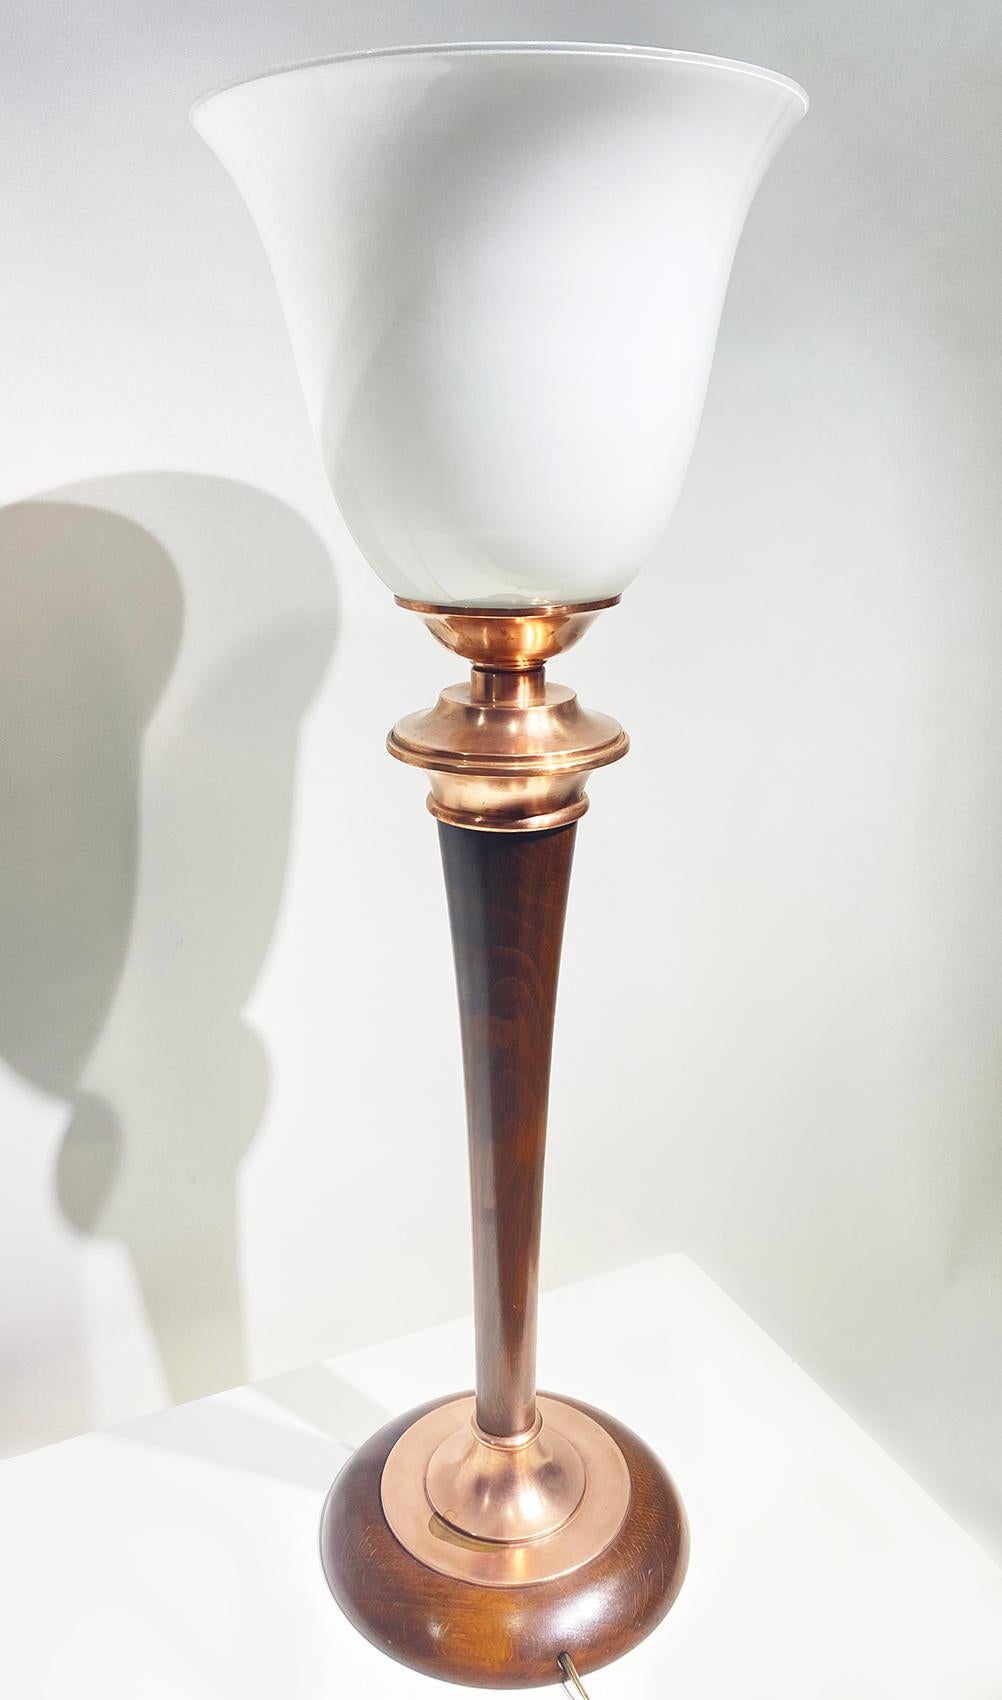 Beautiful table torchiere uplighter, made by Mazda, circa 1930s, France. 
It feature a White opaline glass shade with open top, wood and copper base.
Can be delivered and wired for American or European use.